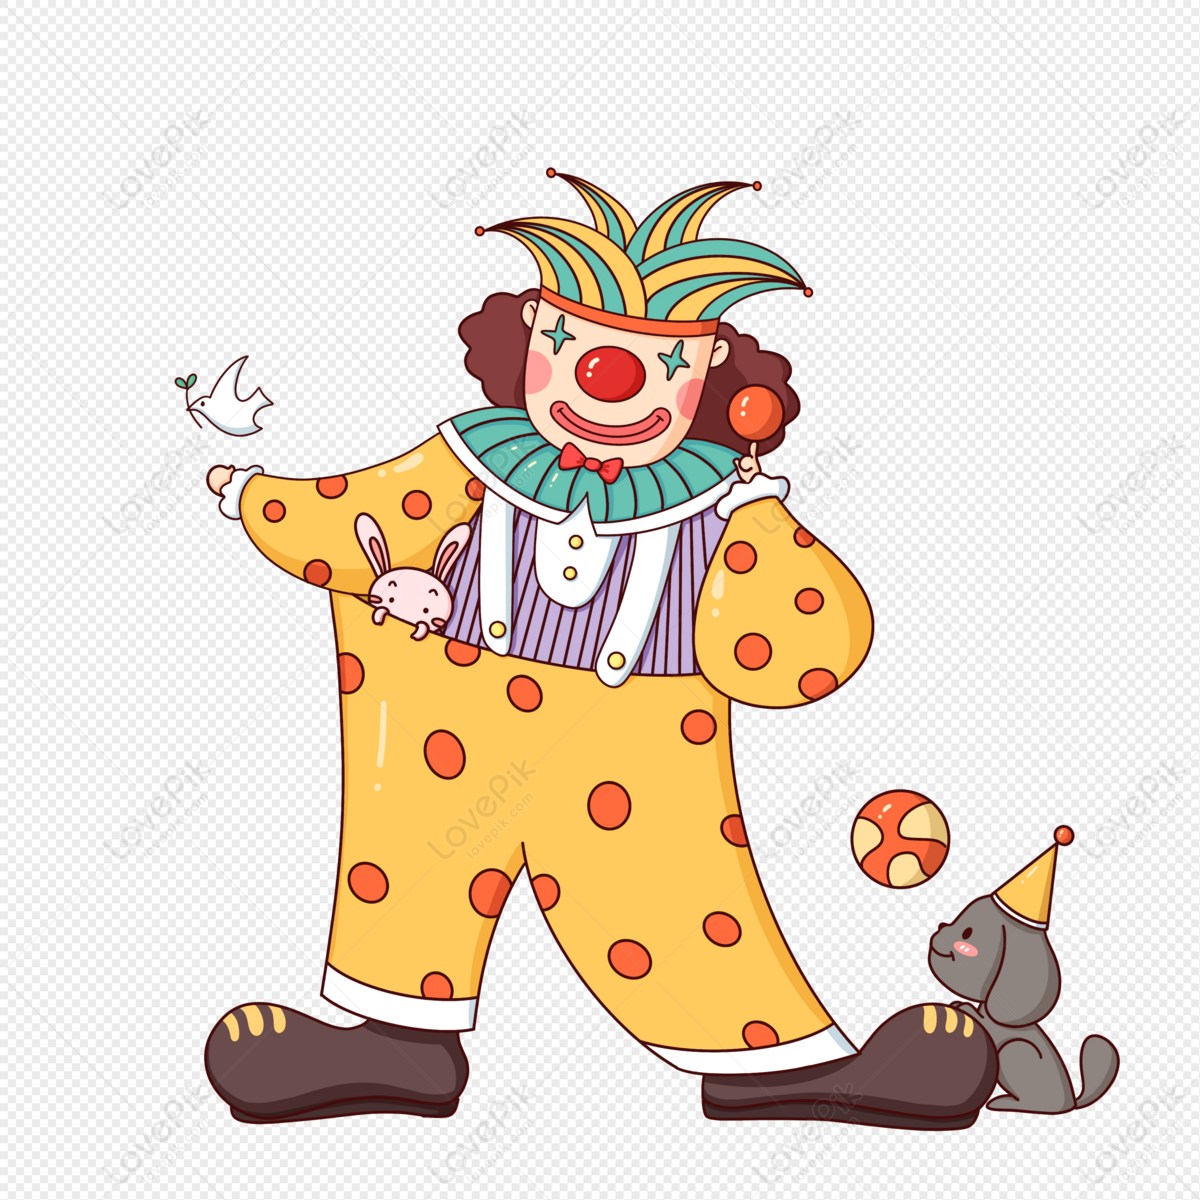 Show Clown PNG Transparent Background And Clipart Image For Free Download -  Lovepik | 401692690